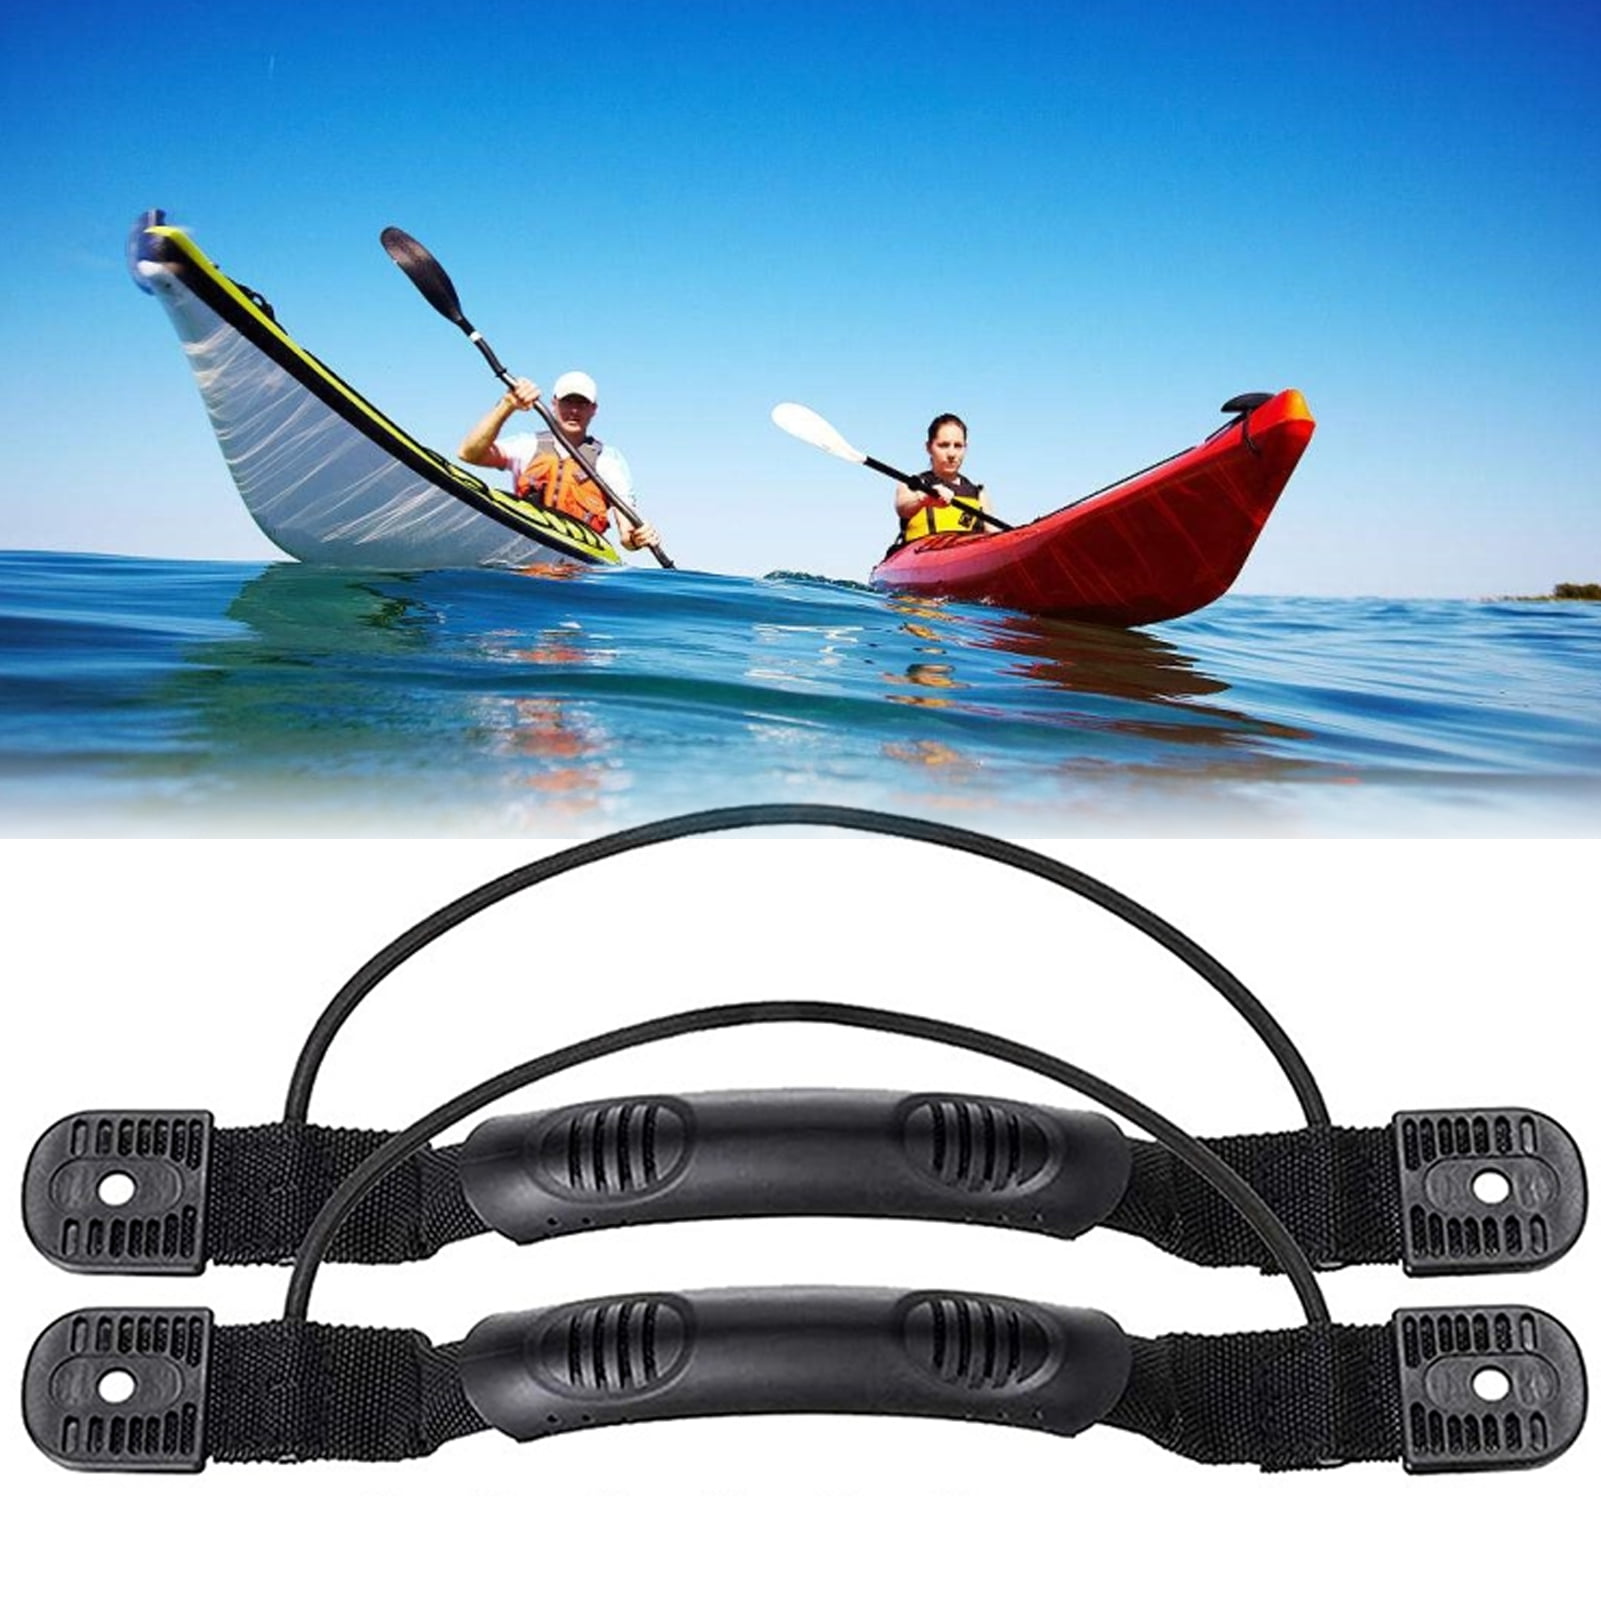 Kayak Boat Carry Handle Canoe Side Mount with Bungee Cord Screws Accessories 